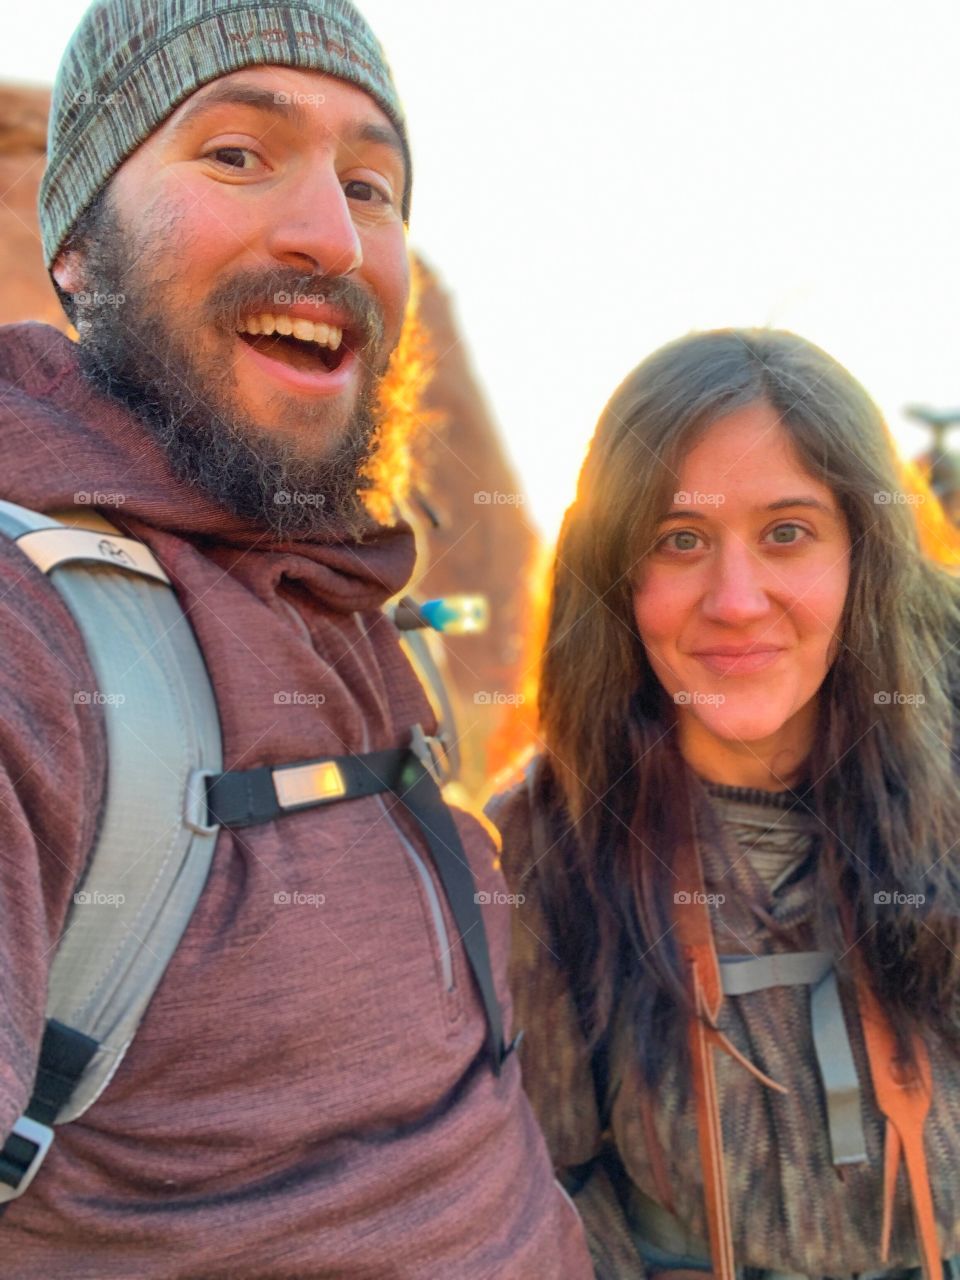 A couple of adventure seekers taking a selfie during the golden glow of sunrise in the desert. Natural colors and lighting make for a striking photograph.